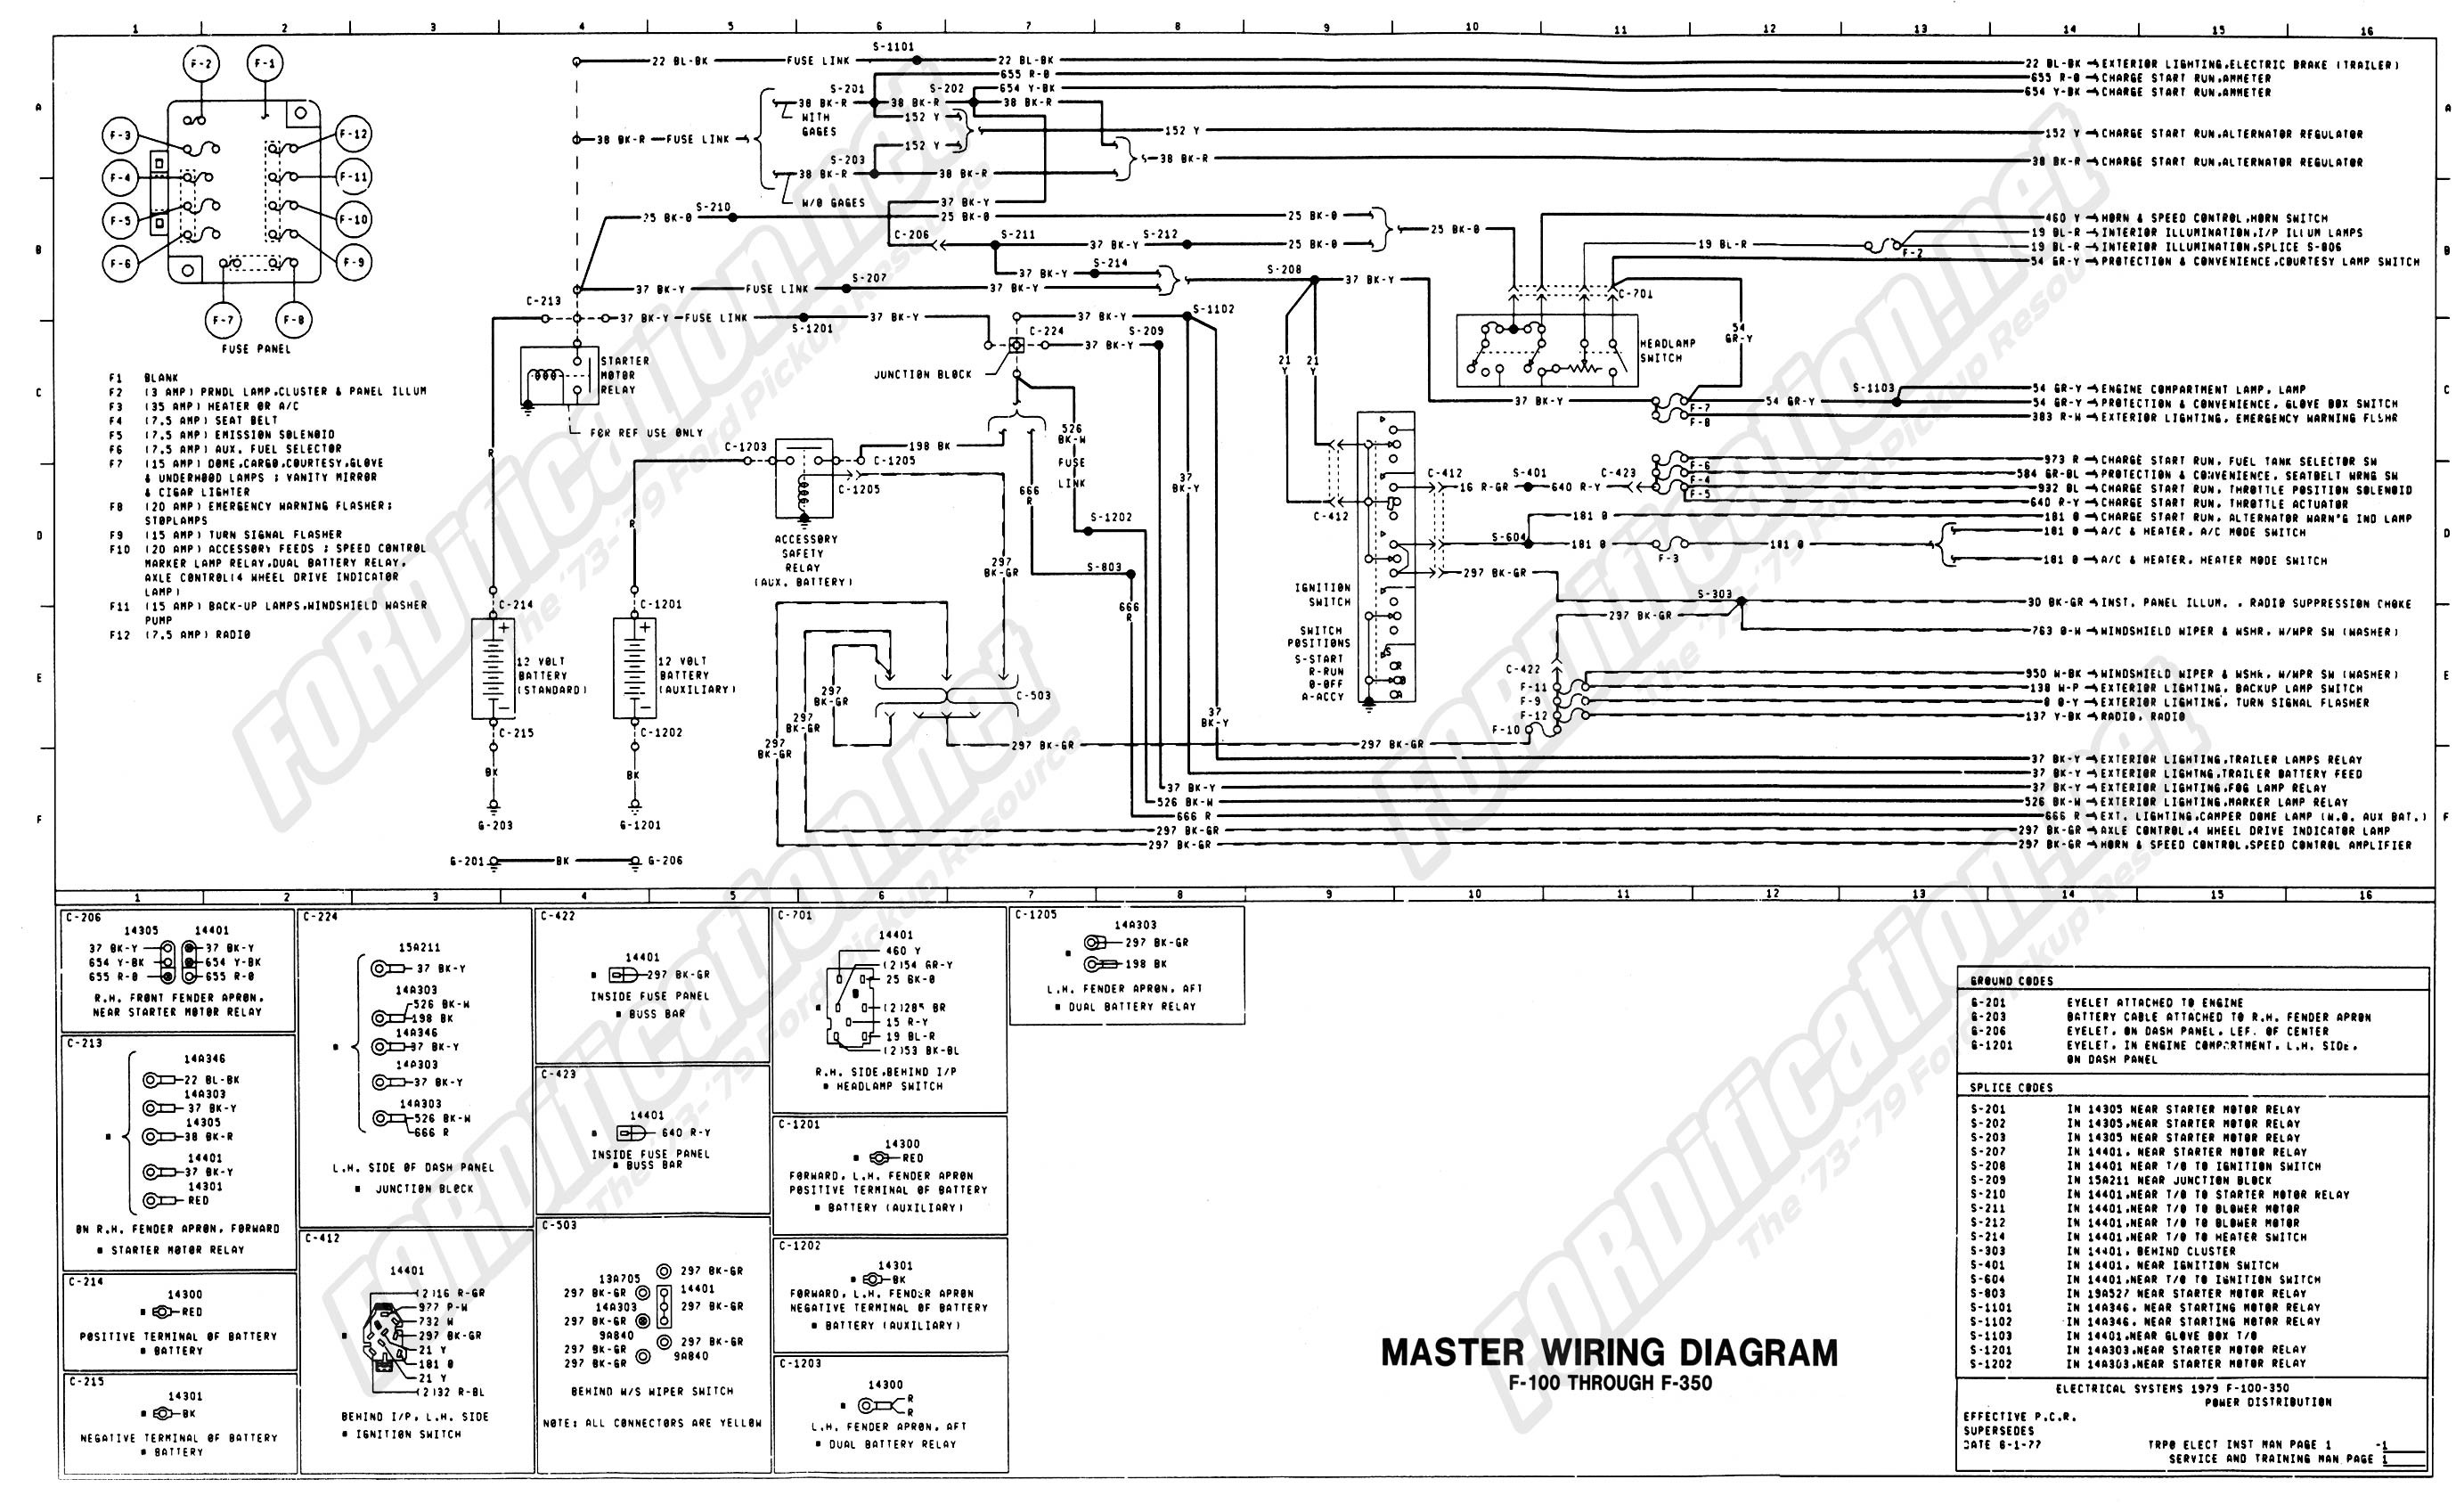 Ford Starter Solenoid Wiring Diagram from mainetreasurechest.com